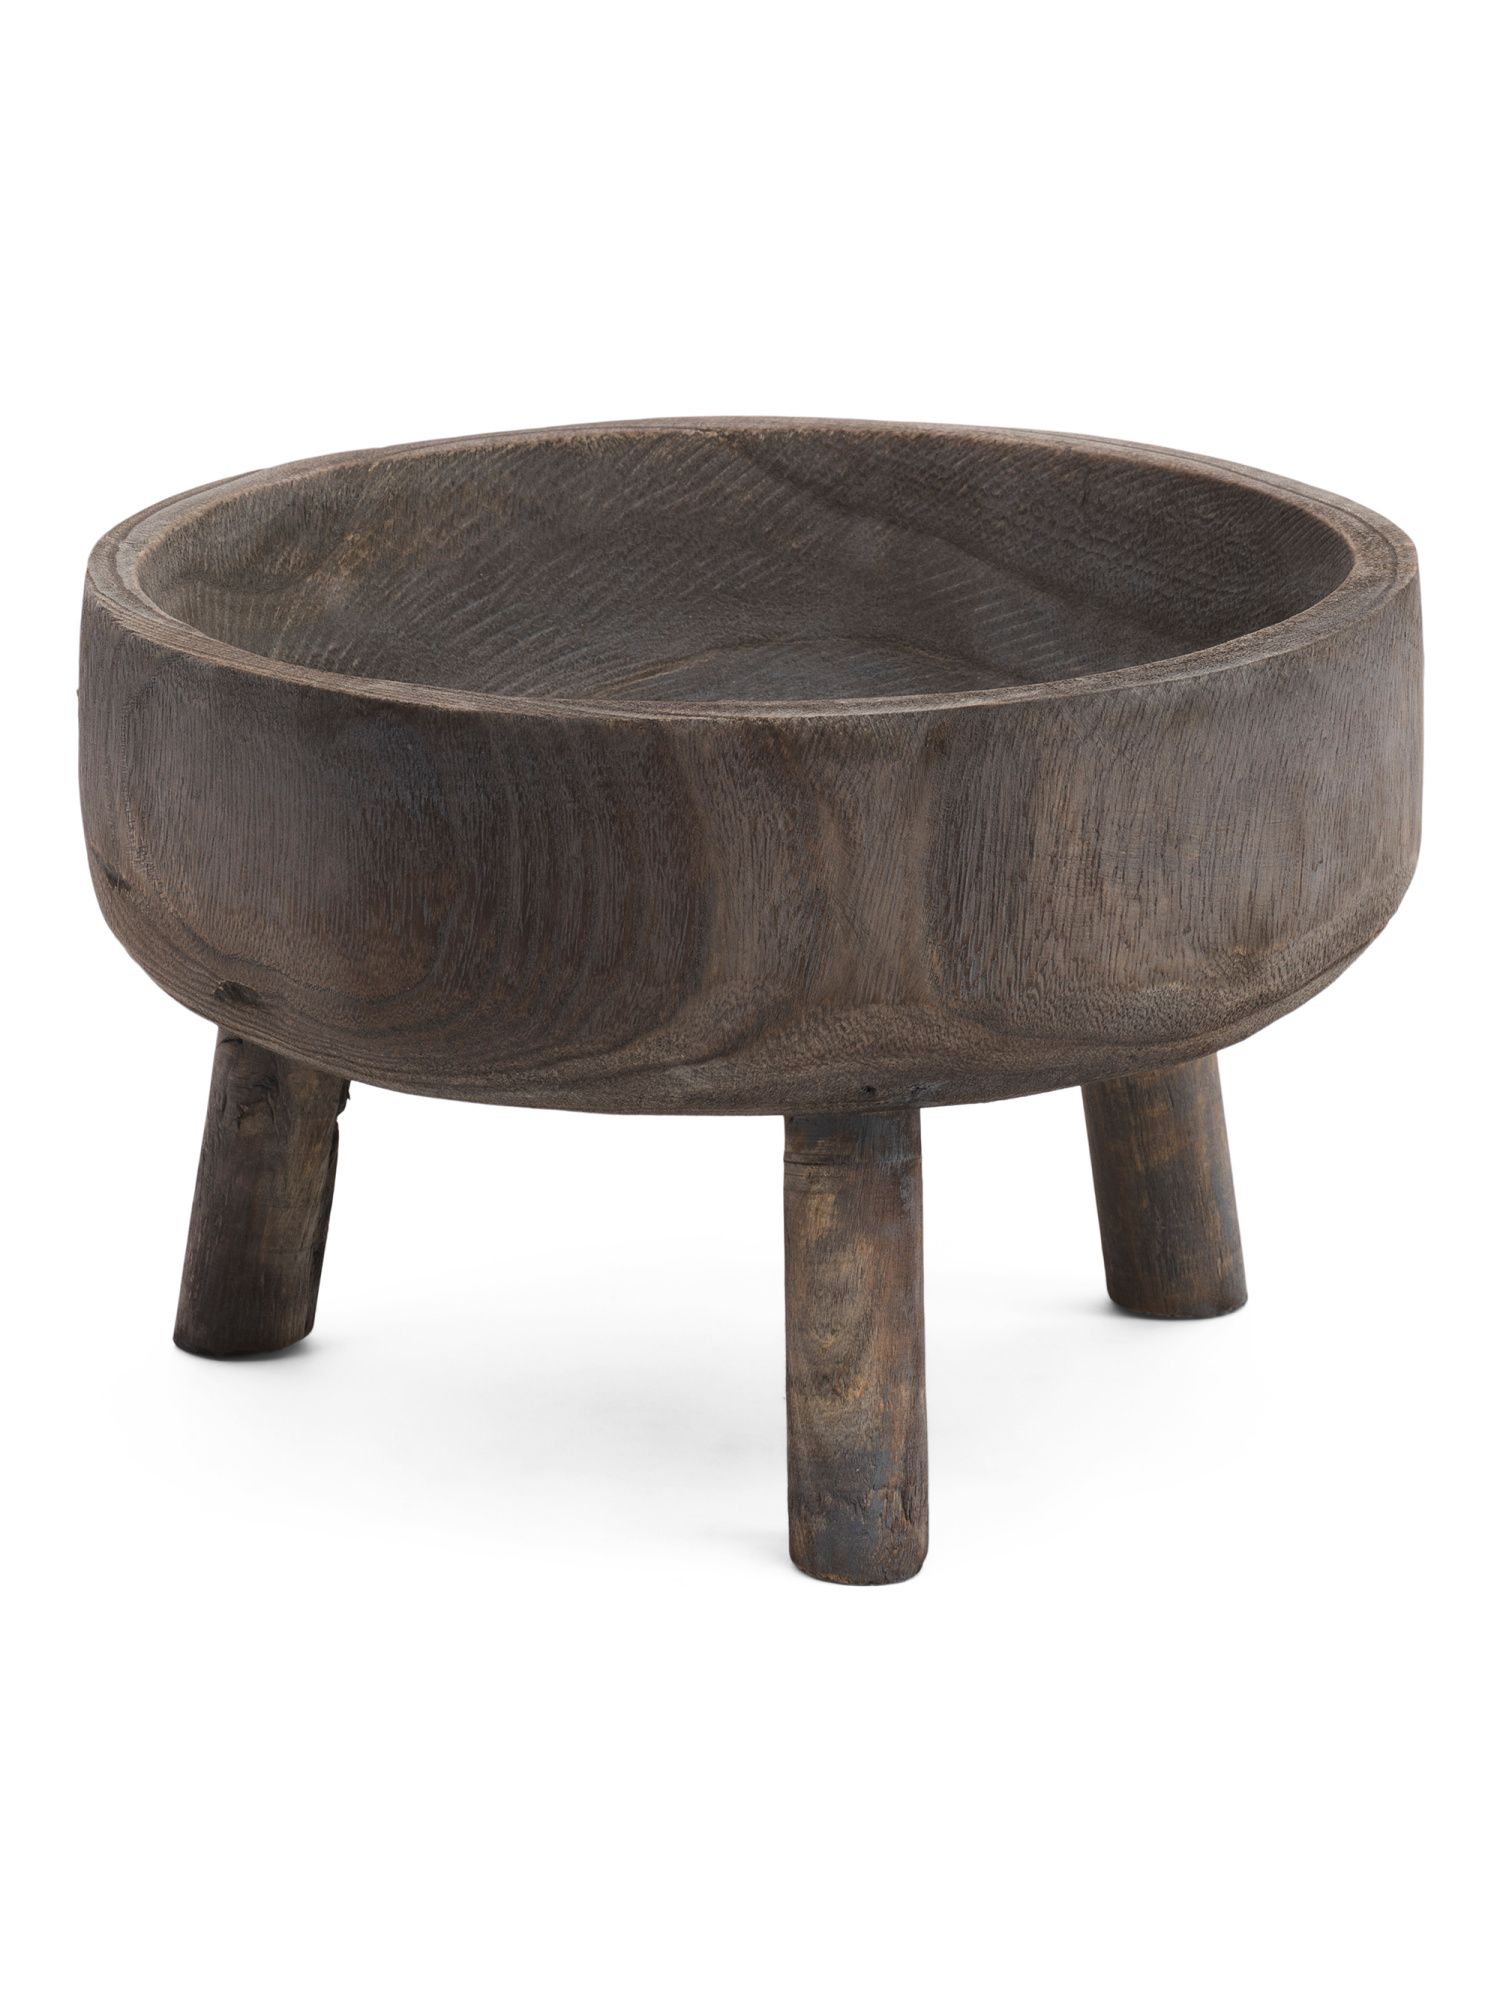 11in Wooden Bowl With Legs | Pillows & Decor | Marshalls | Marshalls